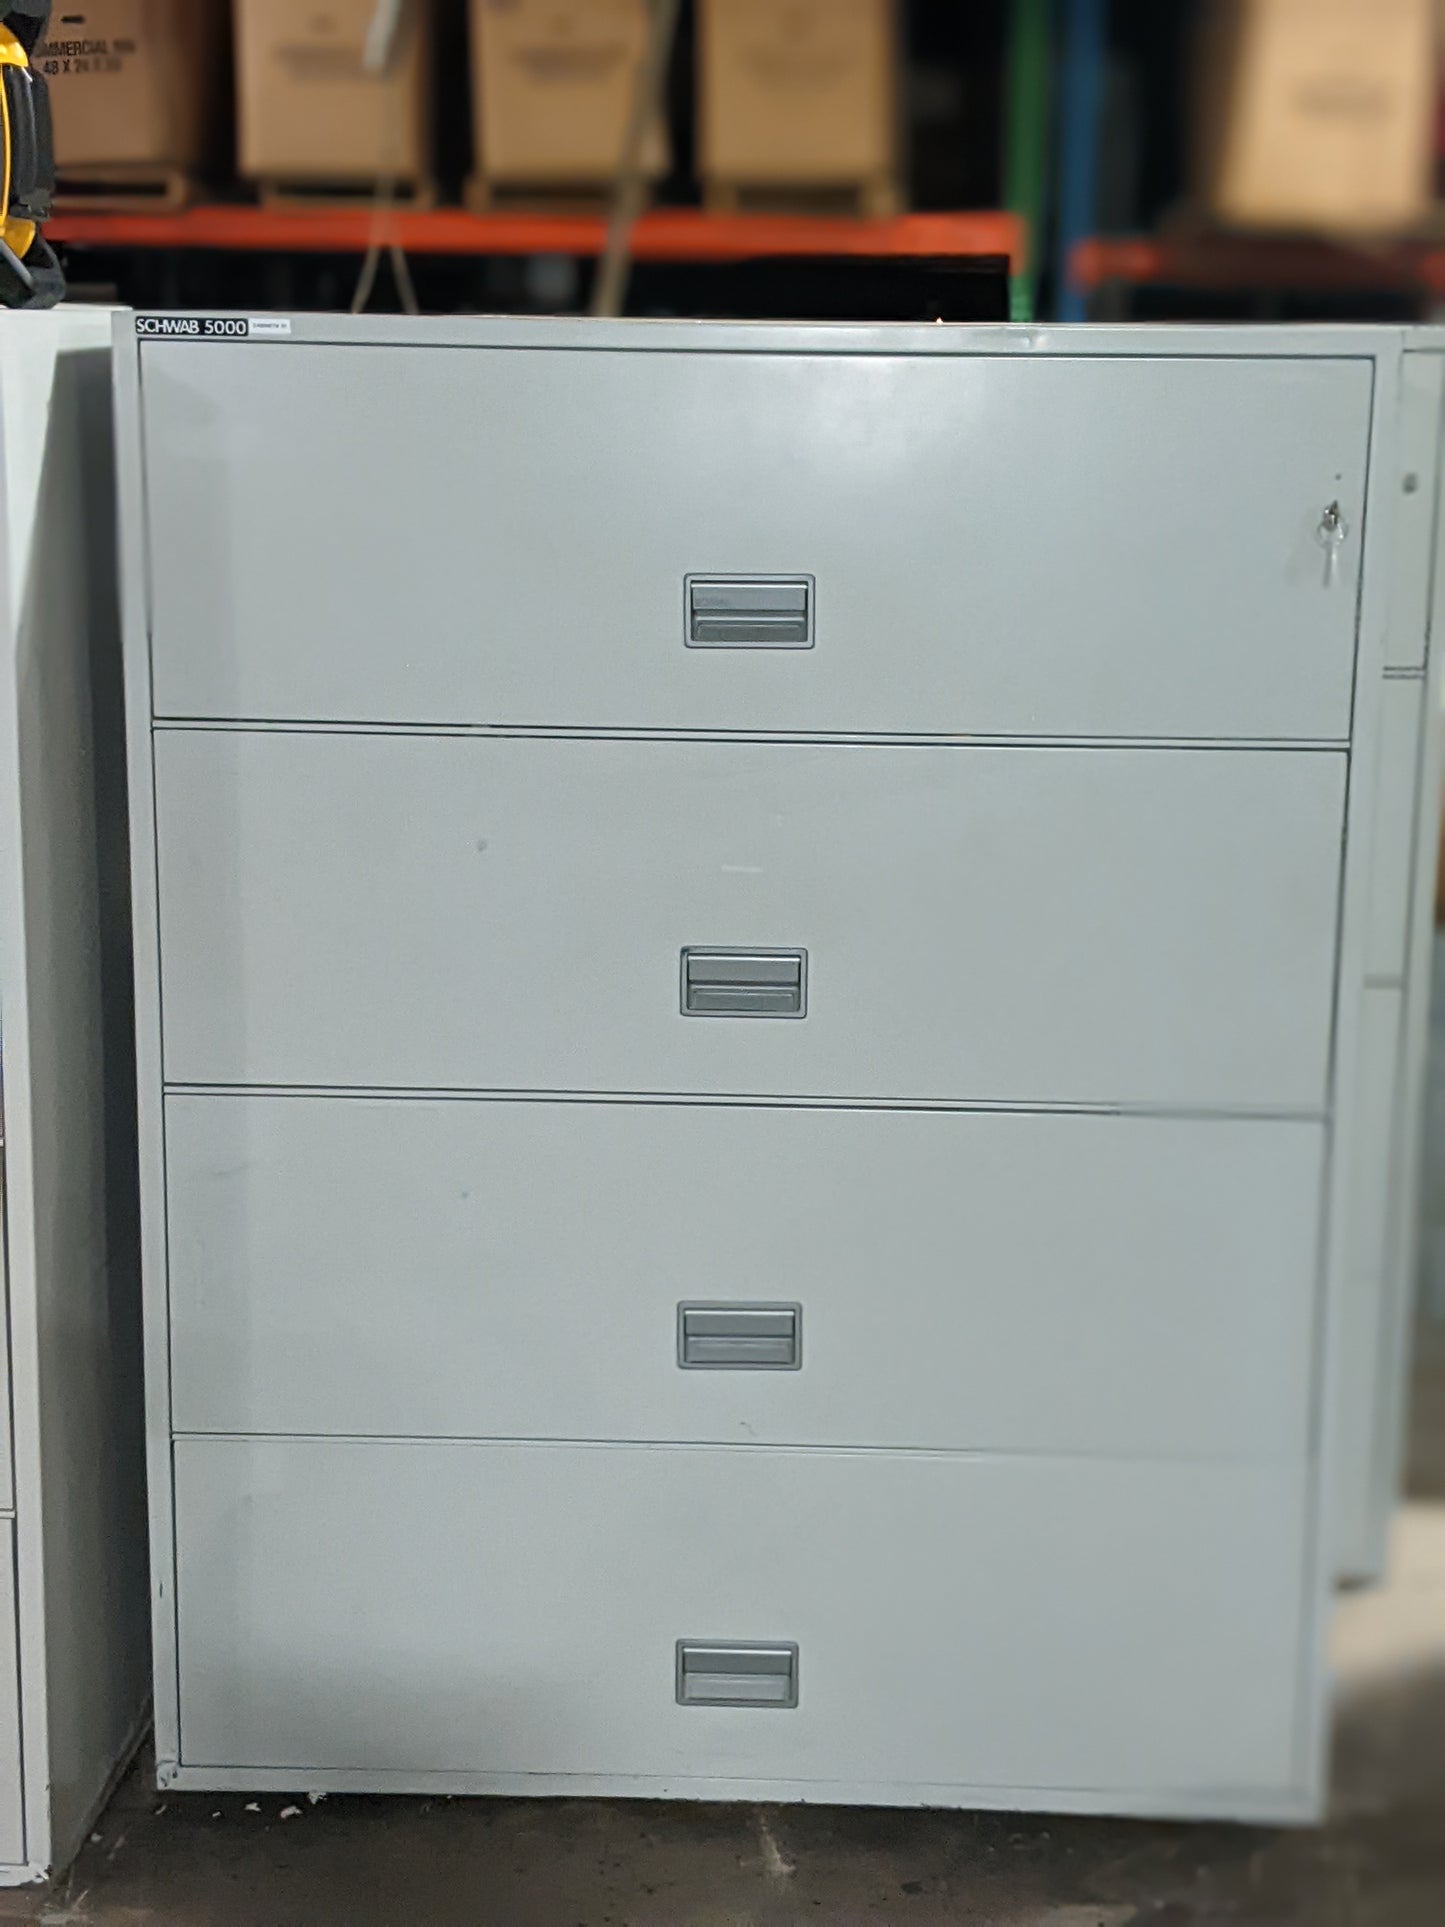 SCHWAB 5000 4 DRAWER LATERAL FILE FIRE RATED